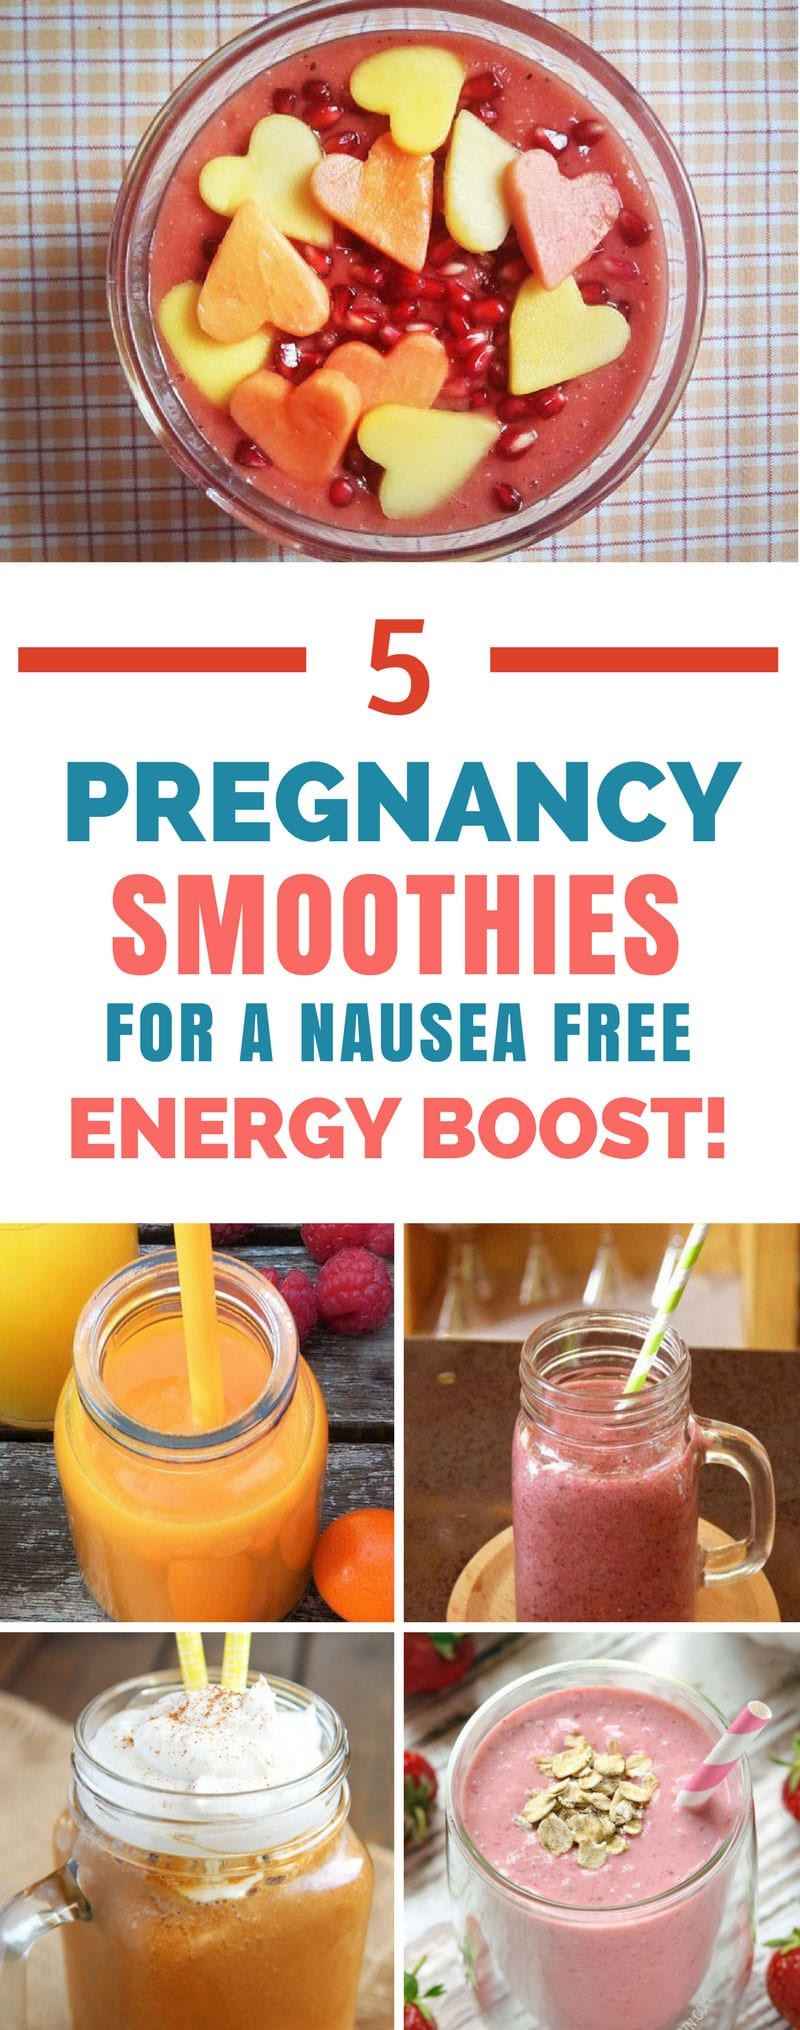 Healthy Smoothies For Pregnancy
 5 Healthy Pregnancy Smoothie Recipes that ll Help You Feel